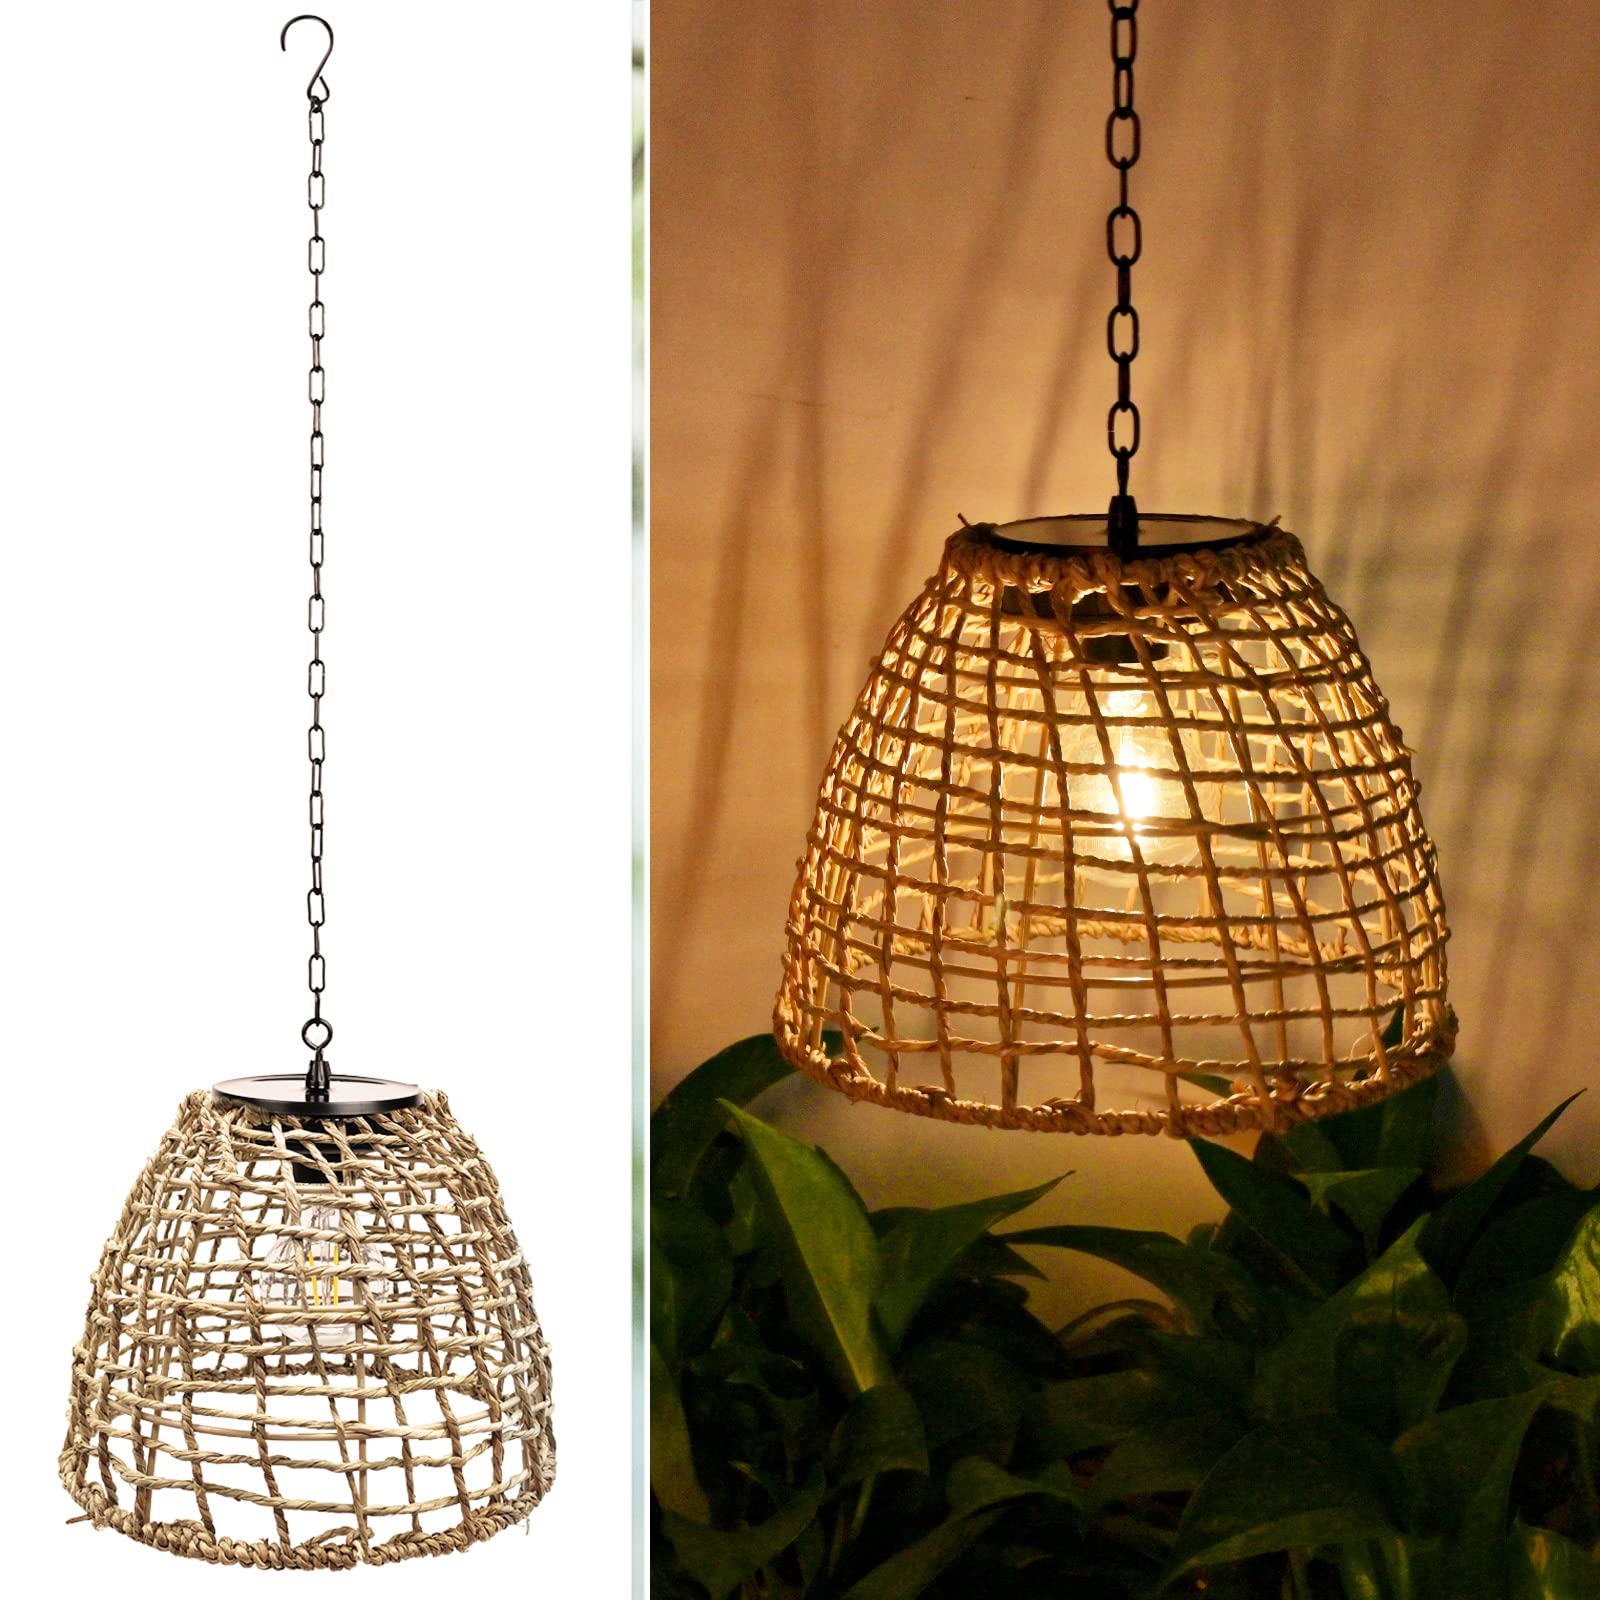 Outdoor Solar Hanging Lantern, Natural Seeweed Rattan Bamboo Woven Porch Patio Gazebo Pendent Chandelier Light Decorative Solar Powered Hanging Lamp for Front Door Garden